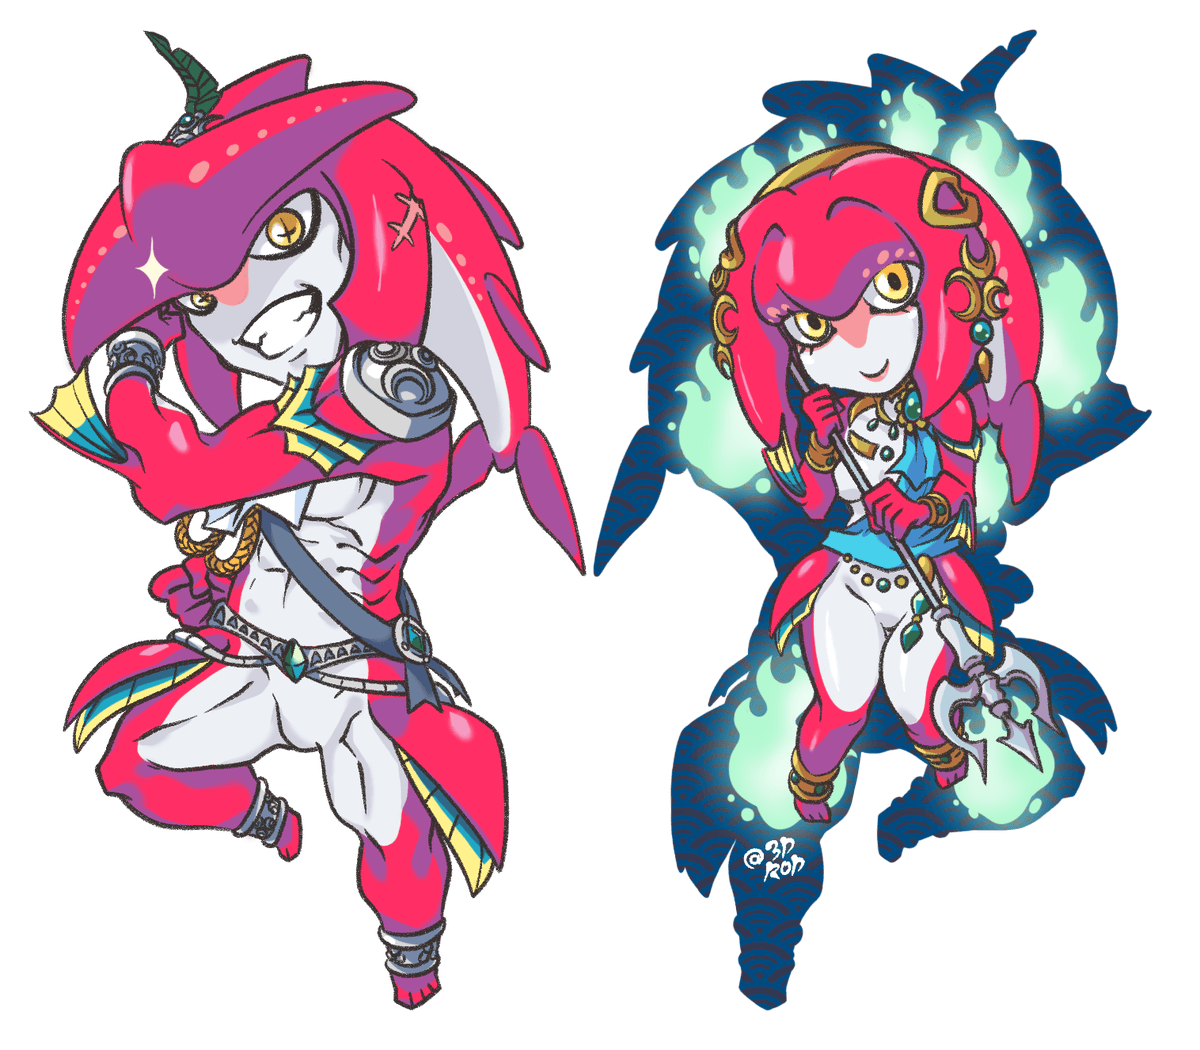 3DROD (on hiatus) of the Wild charms! Which duo